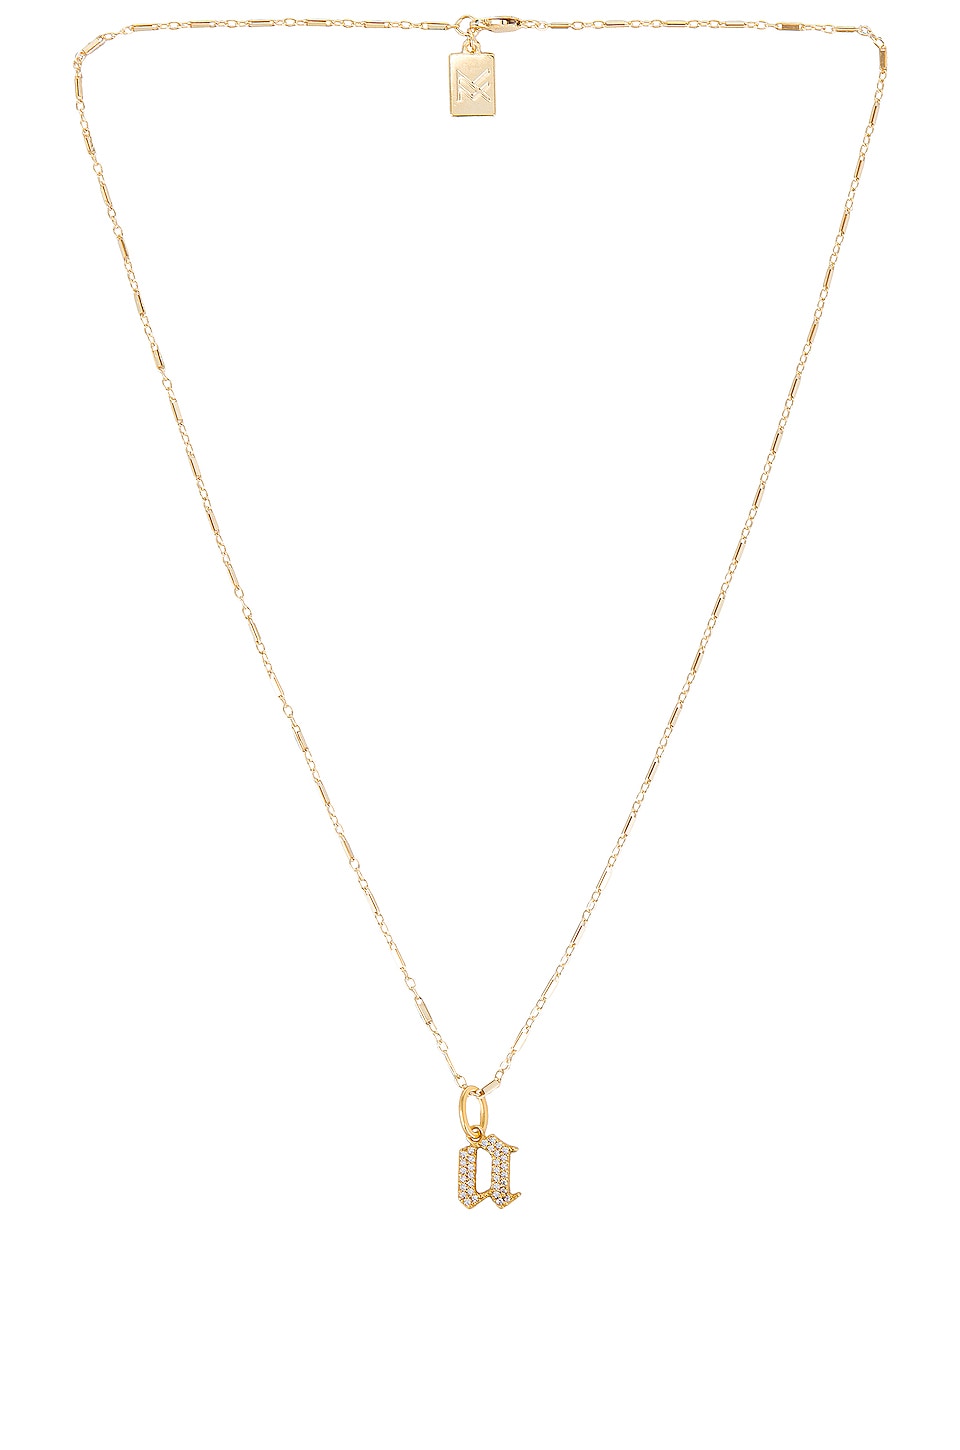 Miranda Frye Gothic Charm and Lindsey Chain Necklace in Metallic Gold - Size V